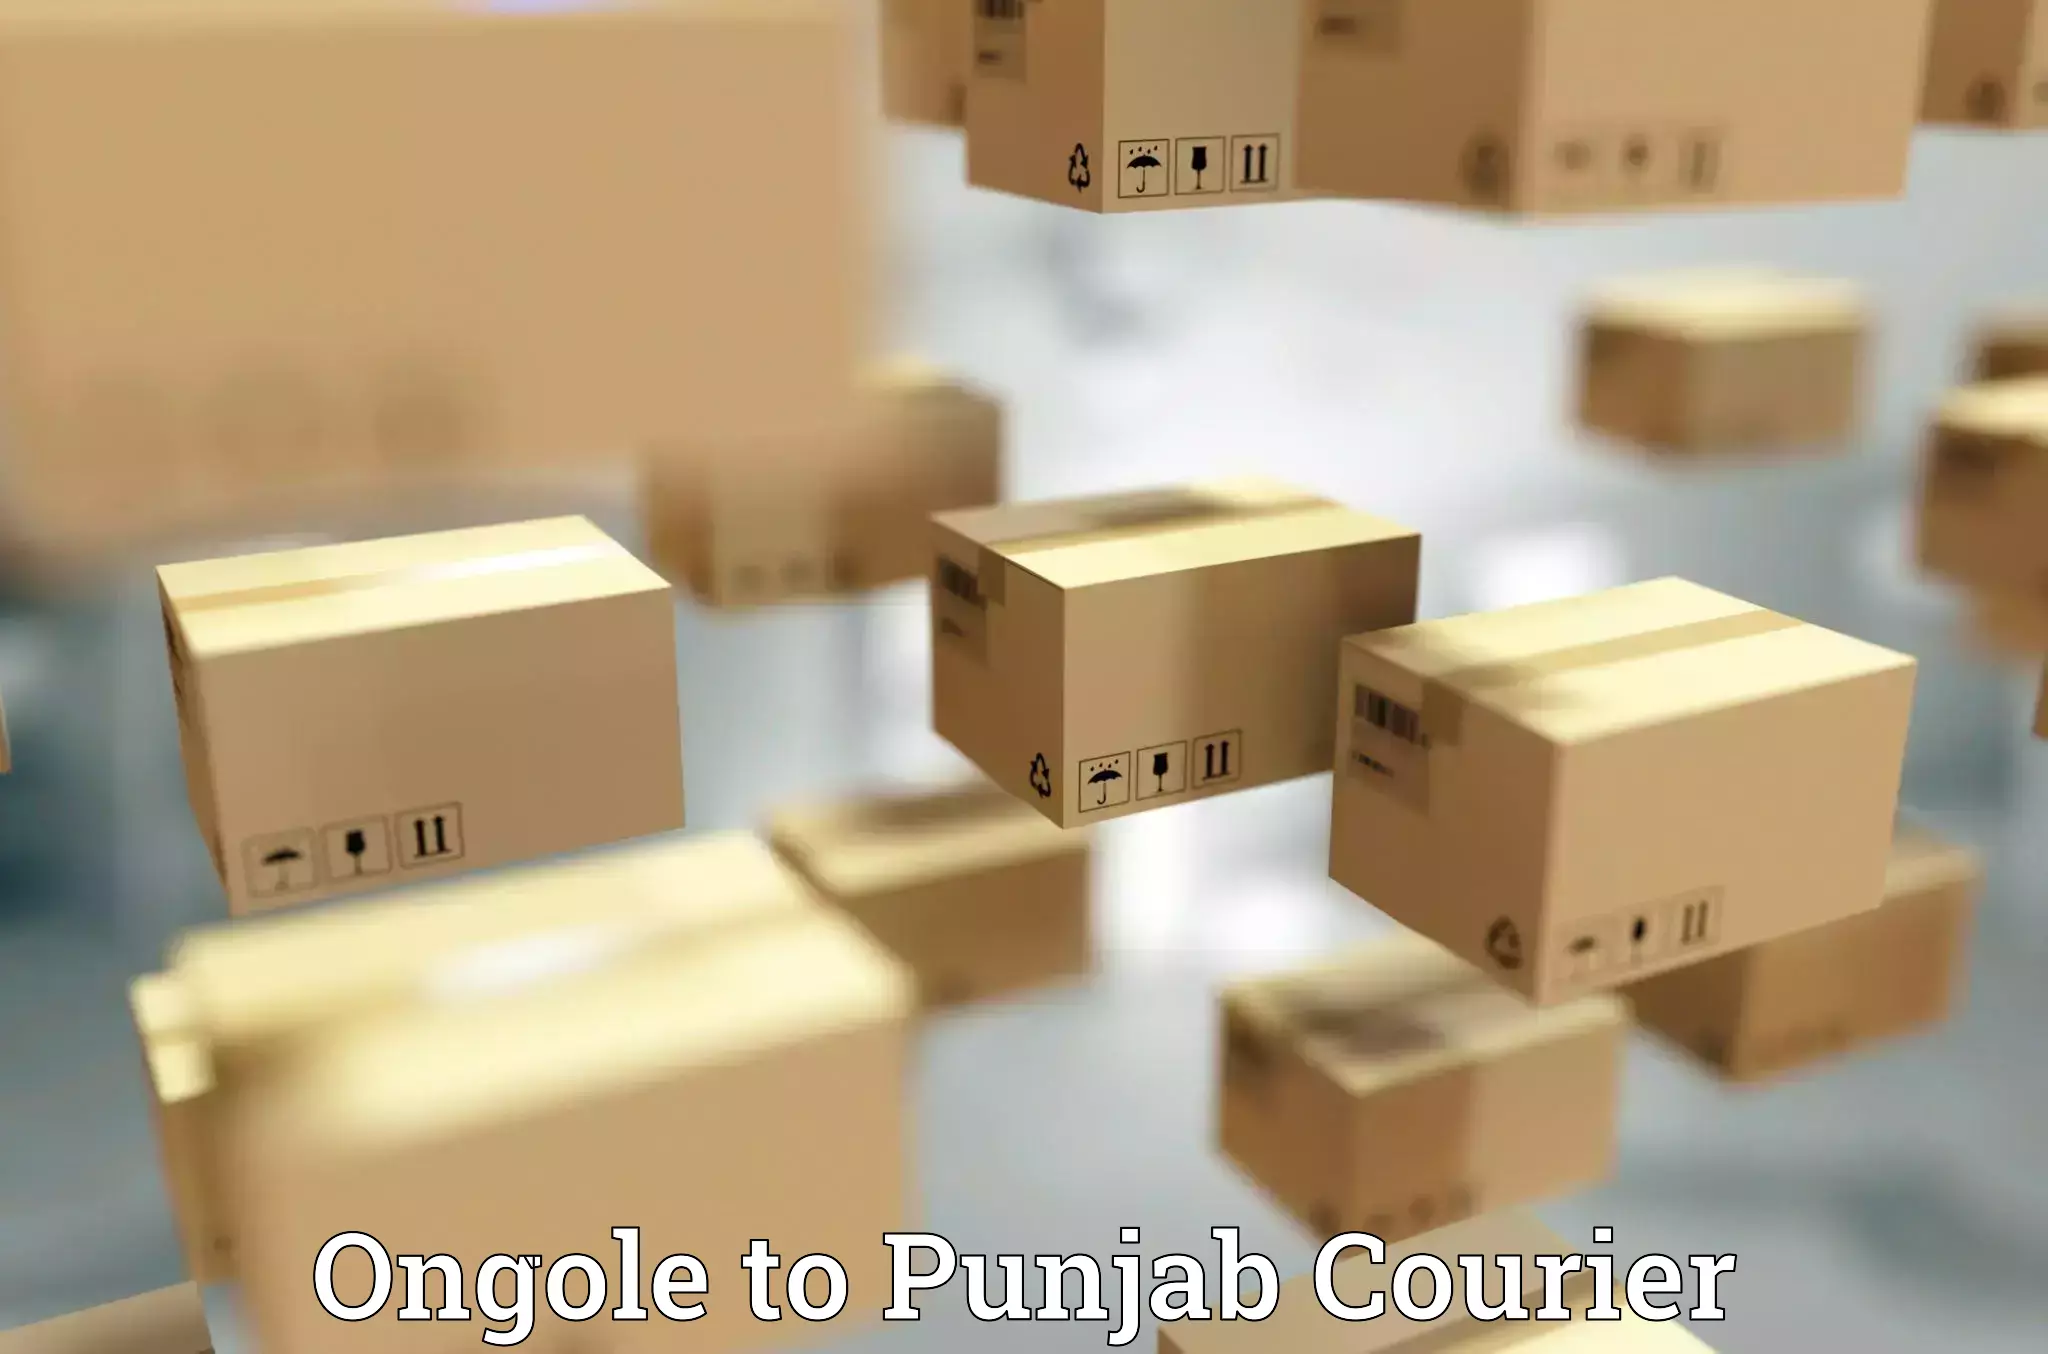 Global courier networks Ongole to Punjab